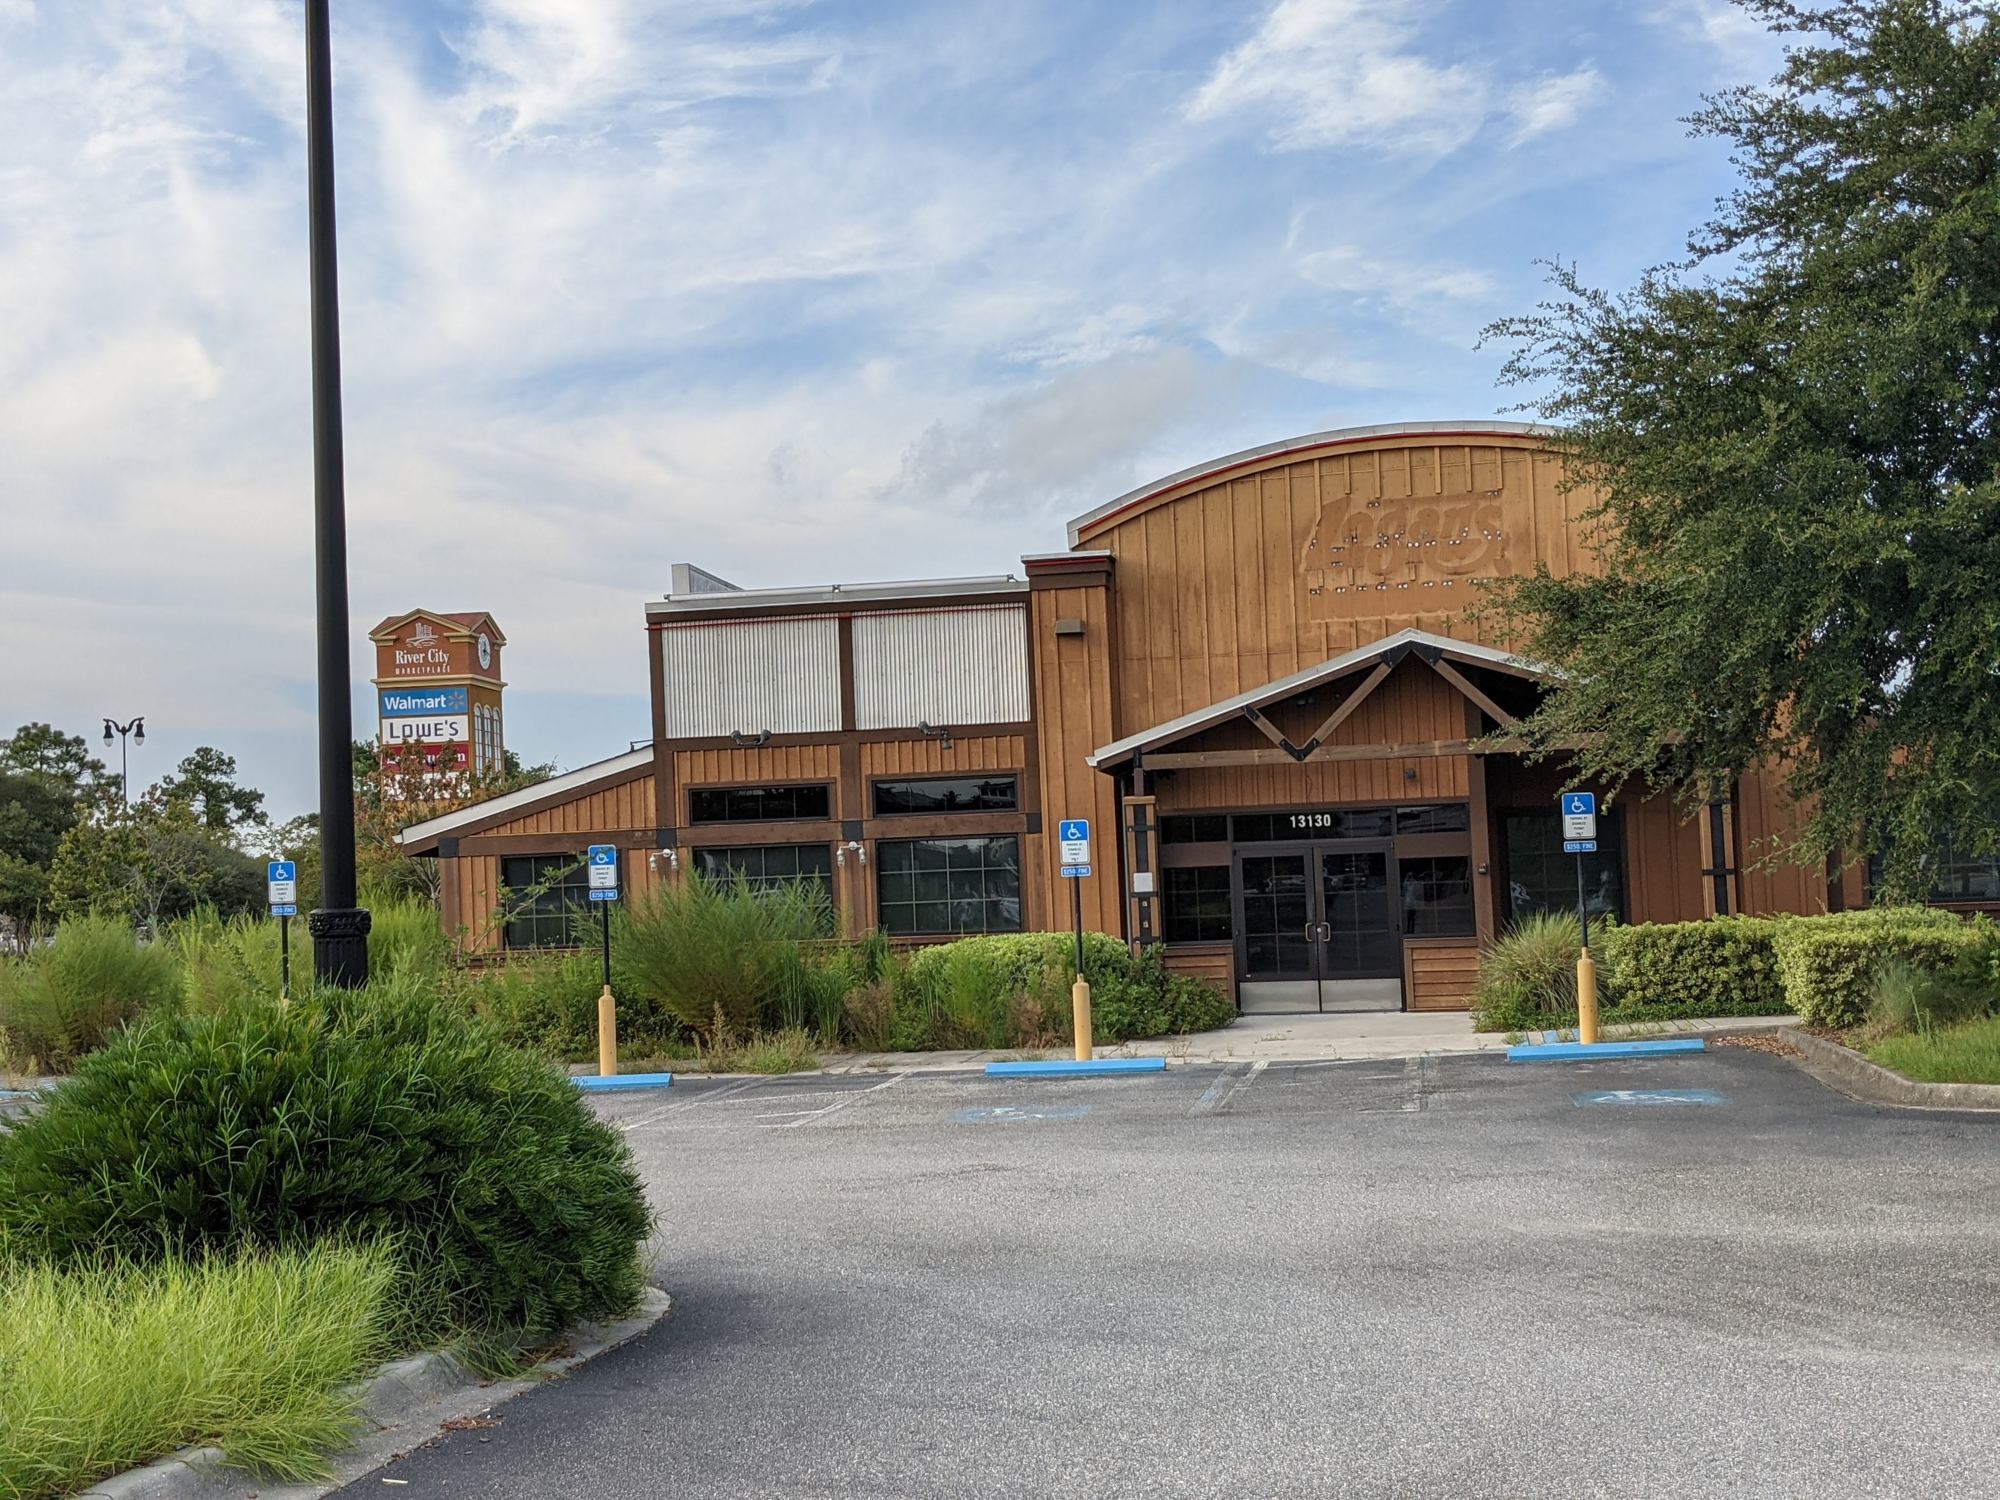 Texas Roadhouse will replace the closed Logan’s Roadhouse. The Logan's will be demolished.